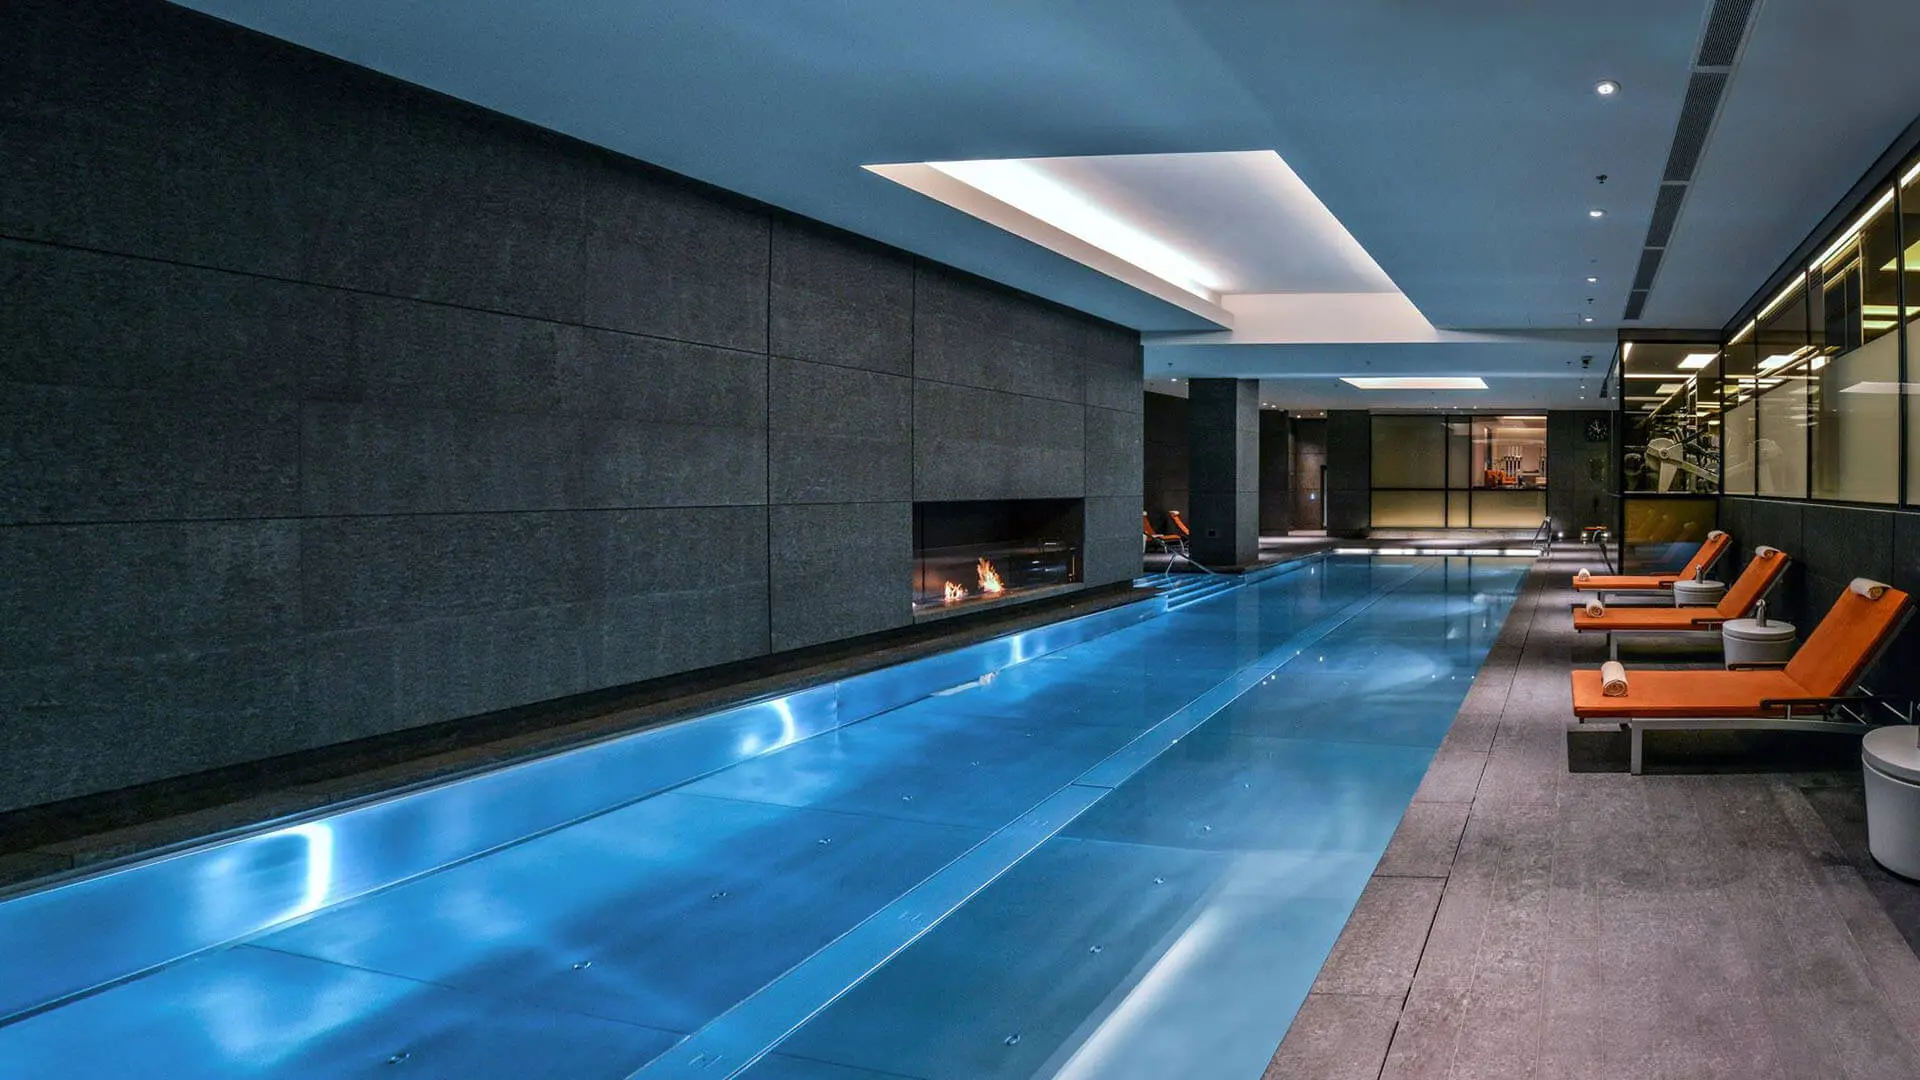 The Spa at Mandarin Oriental, best spa in London for luxury treatment